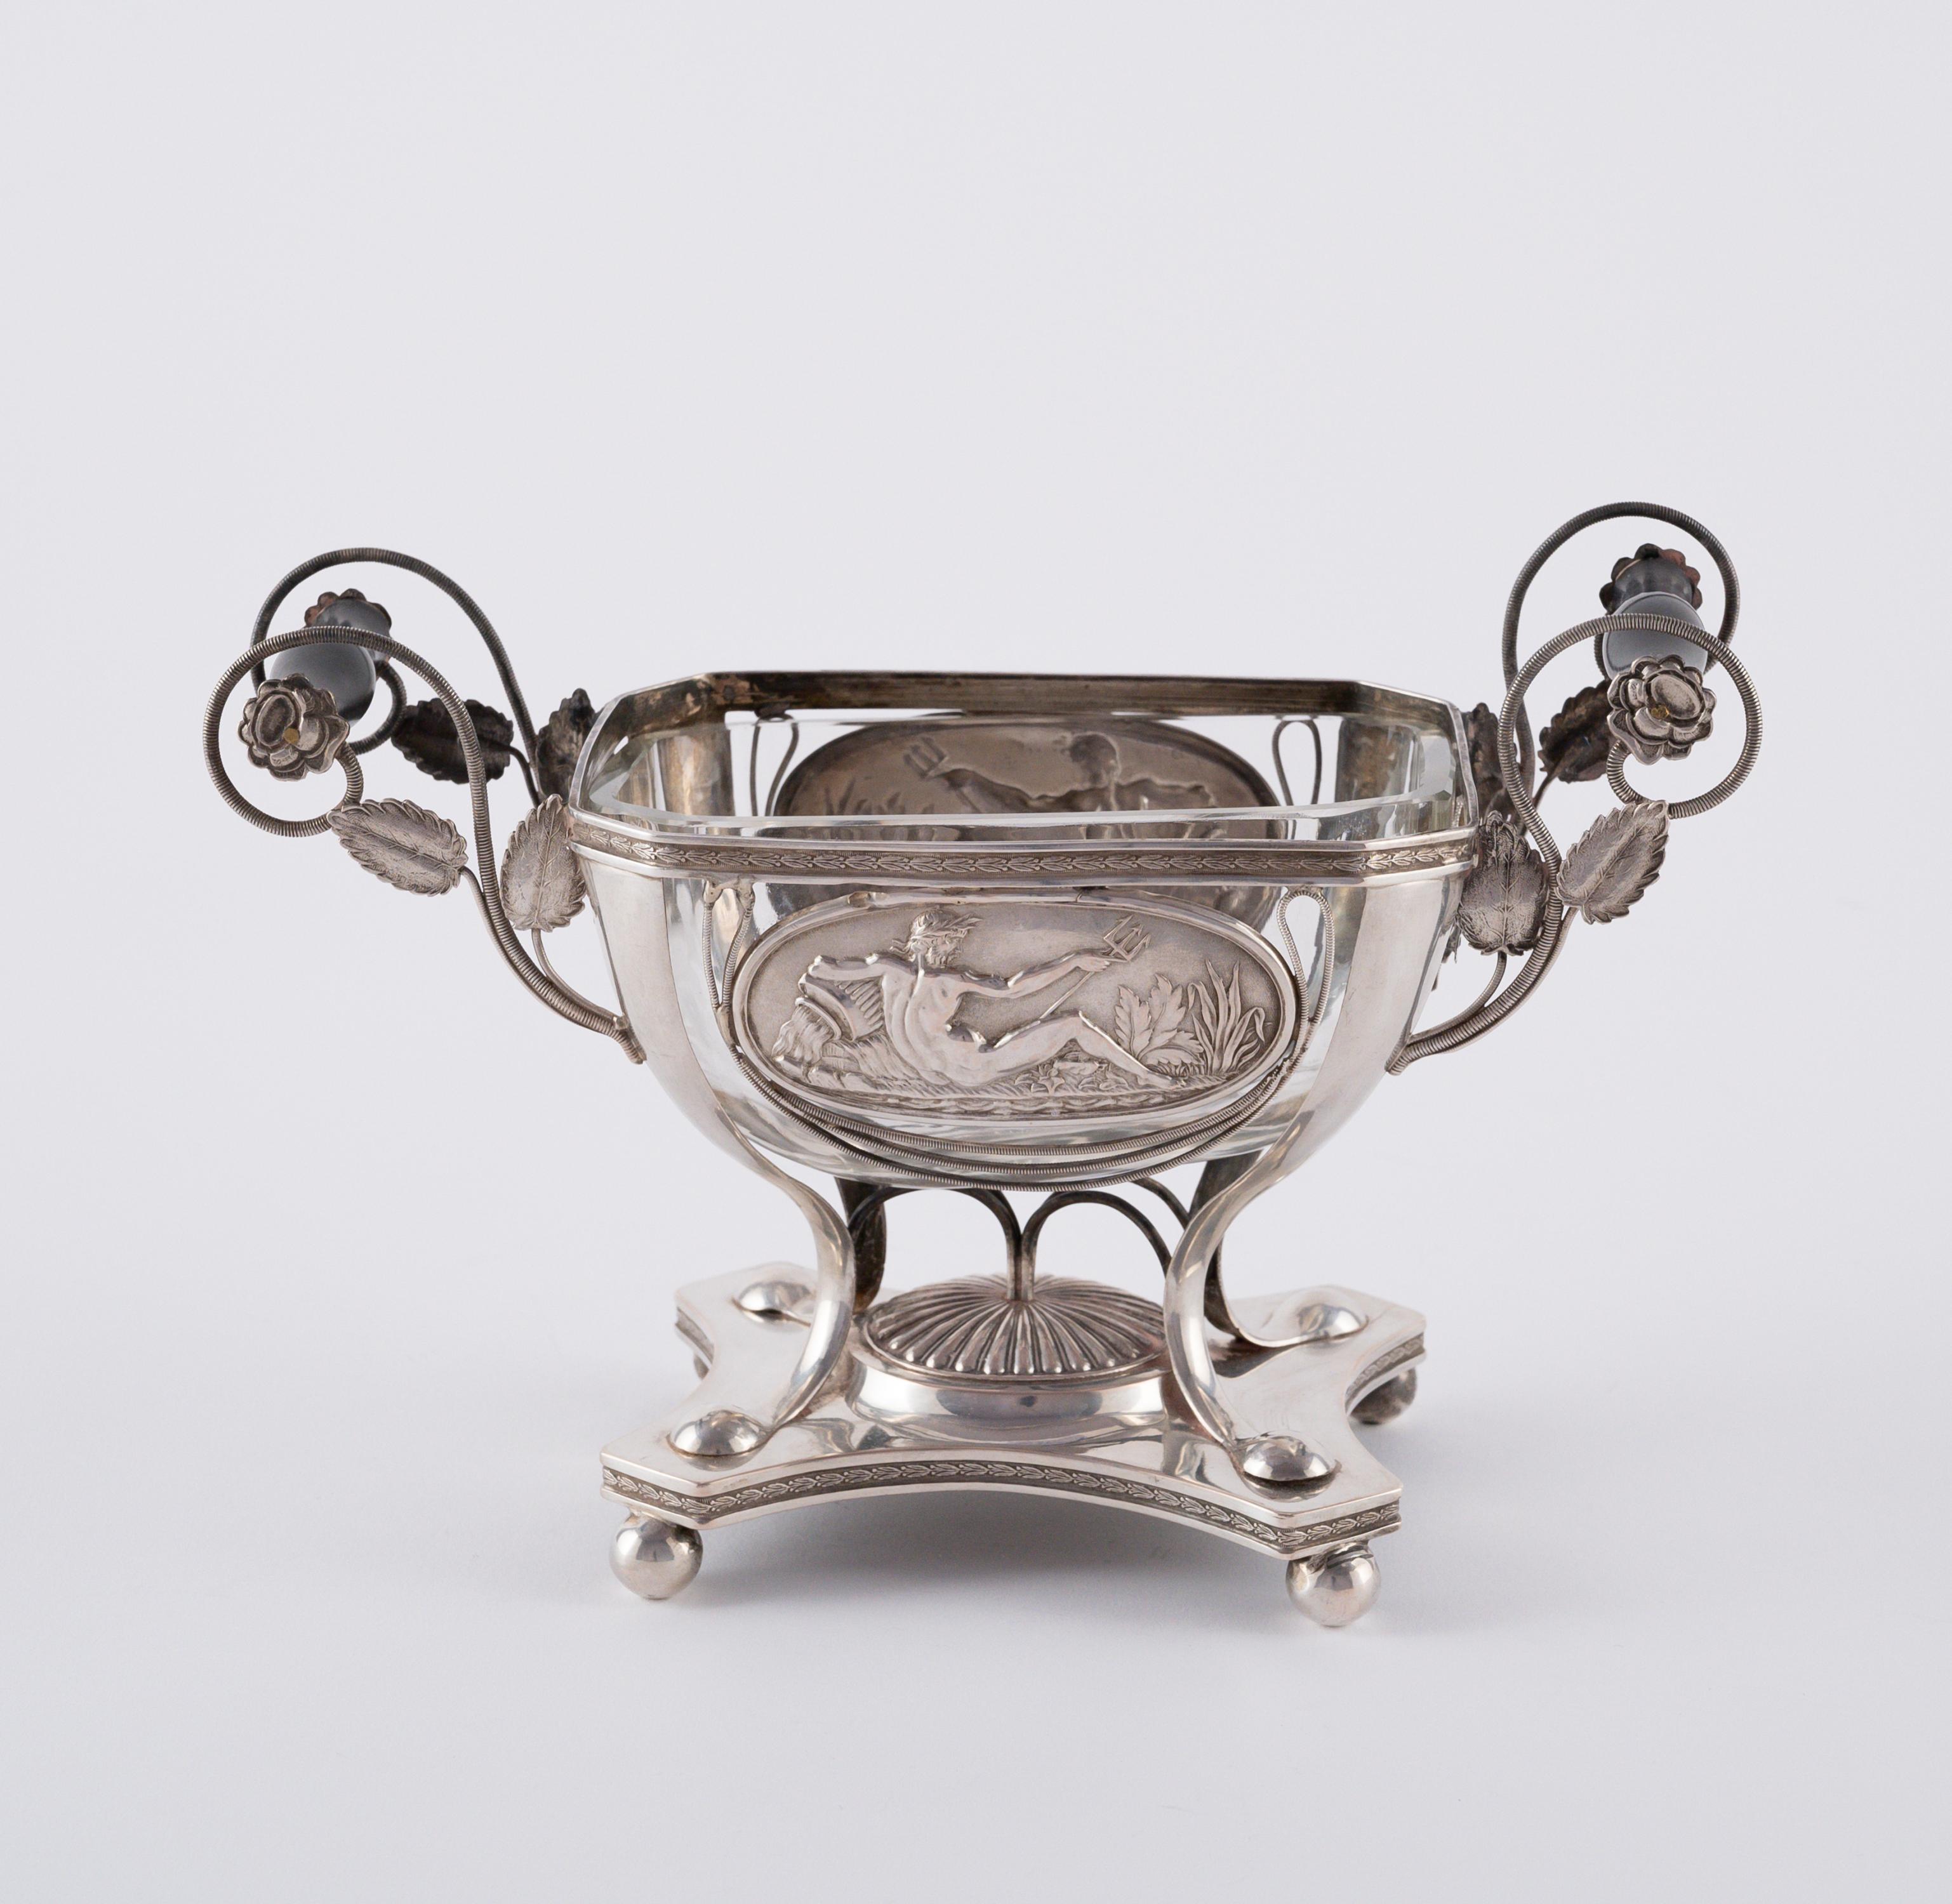 SILVER BIEDEMEIER SUGAR BOWL WITH RIVER GOD - Image 3 of 6